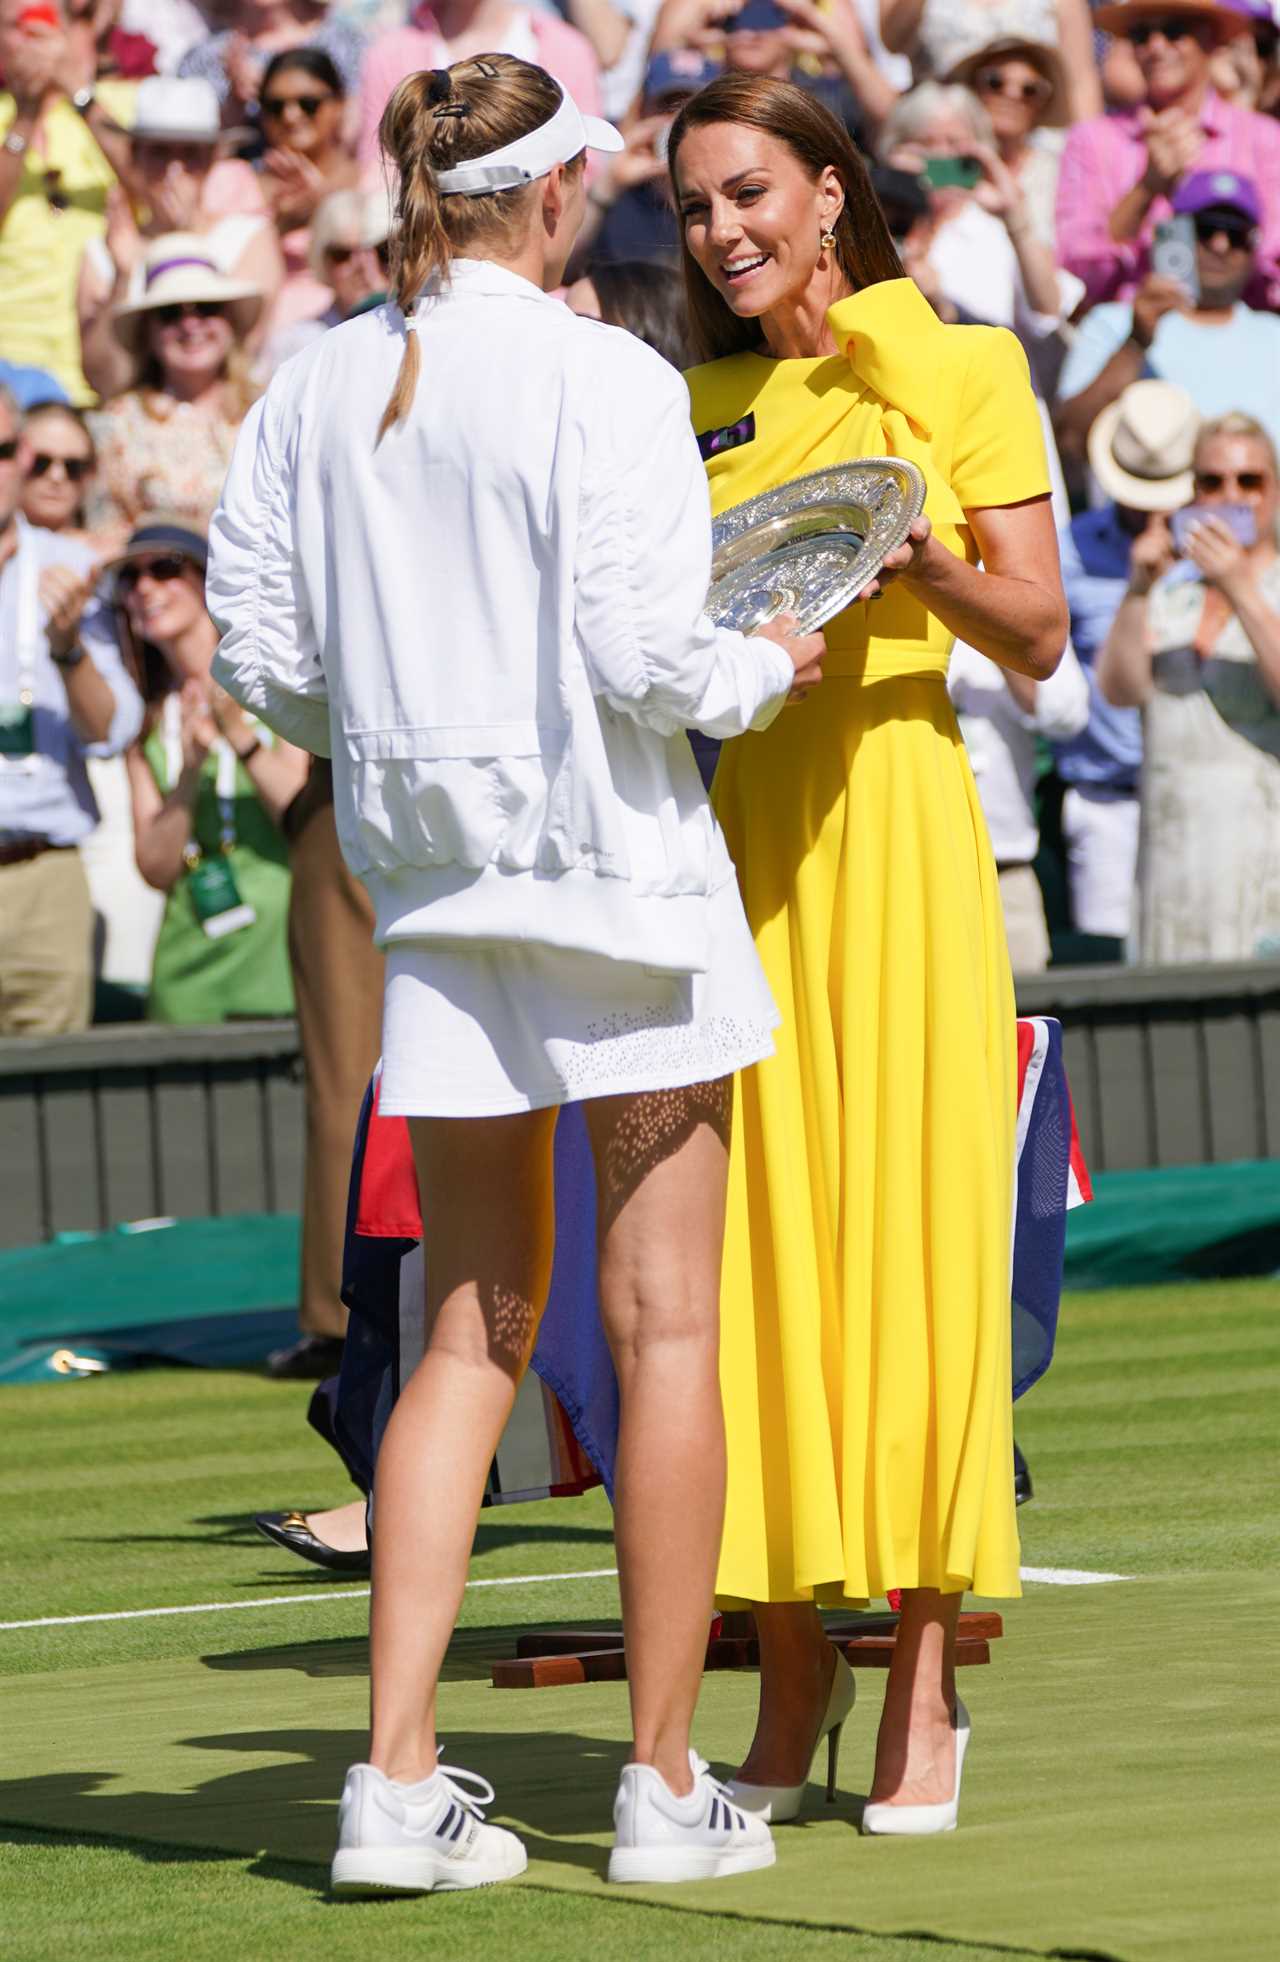 ‘I don’t mean to get into politics but…’ McEnroe says what everyone’s thinking as Kate hands Rybakina Wimbledon trophy